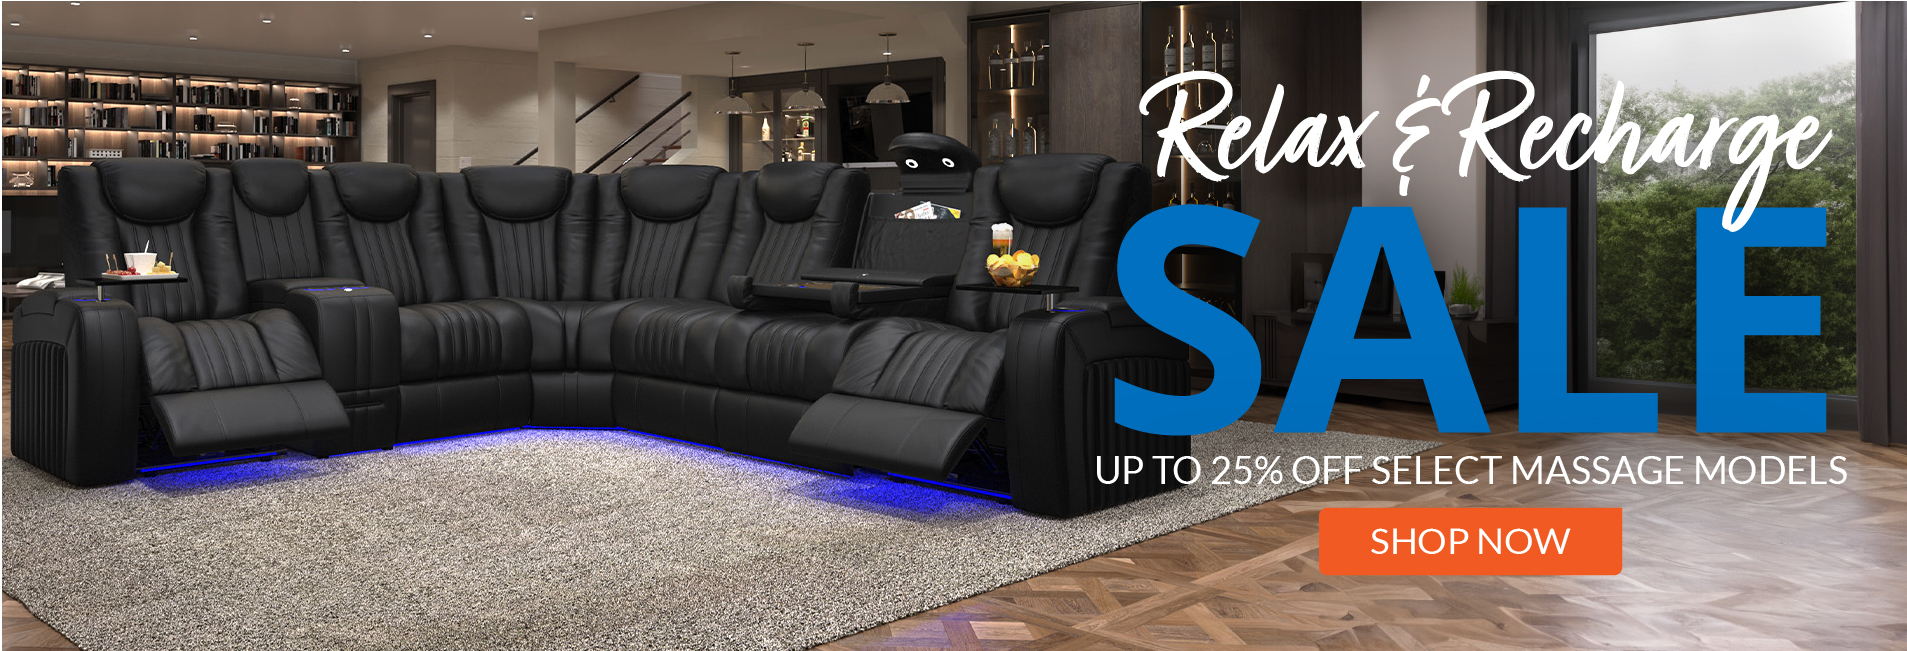 Relax and Recharge Sale